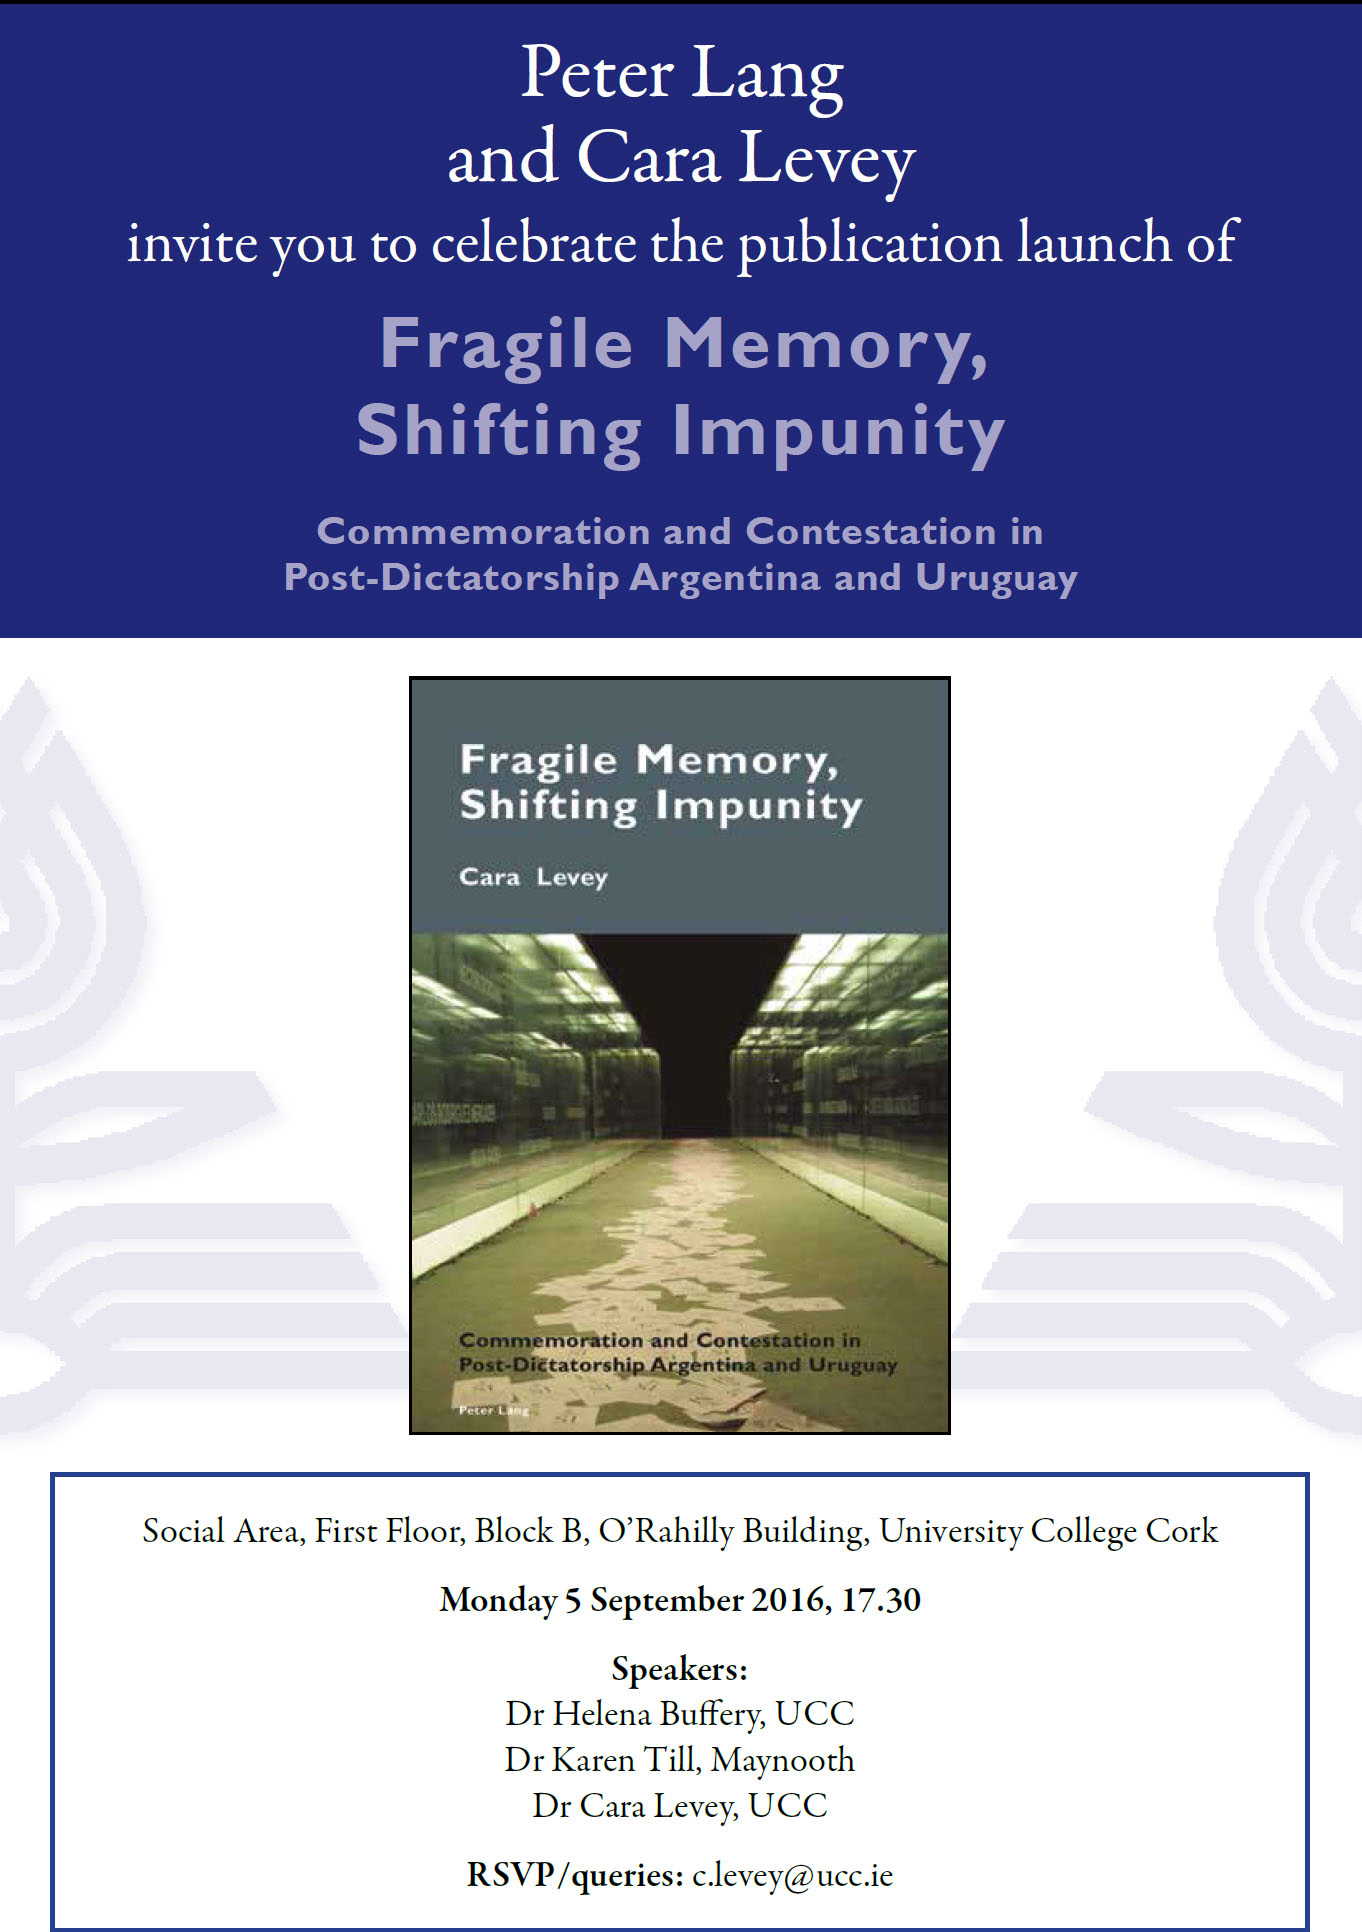 New Approaches to Memory Workshop and Book Launch